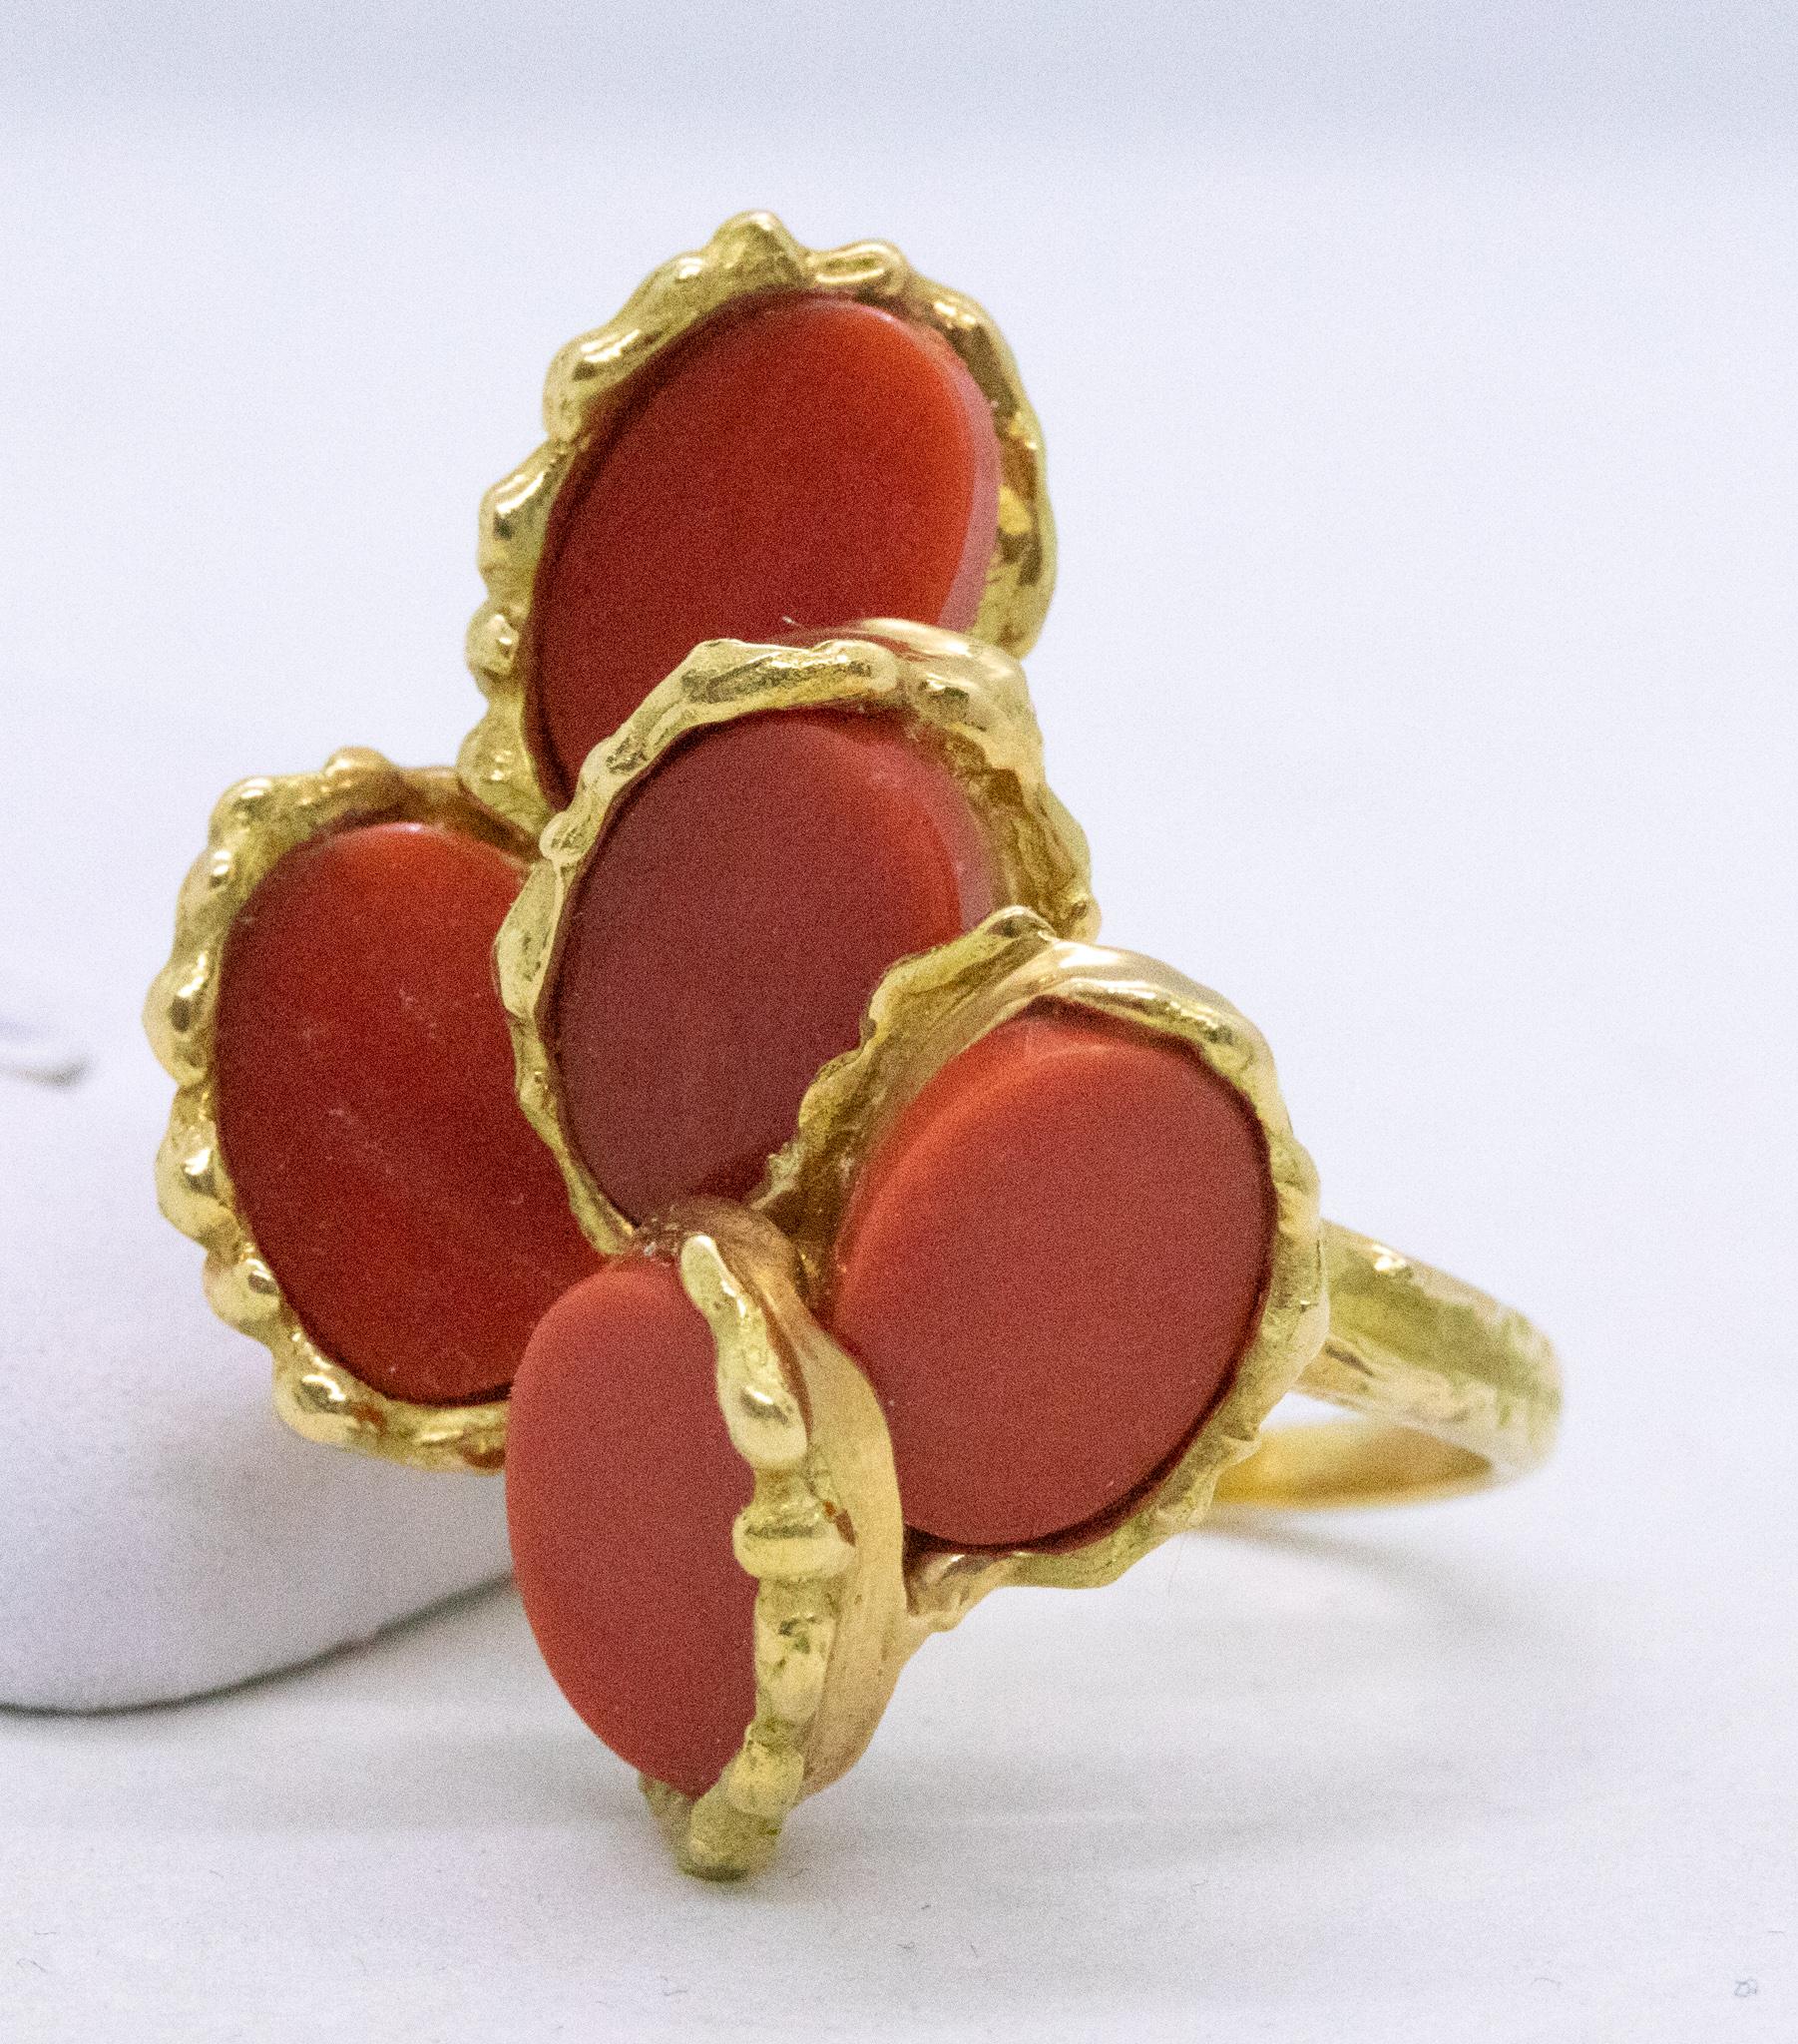 Chaumet 1970 Paris Retro Cocktail Ring in 18Kt Gold with Red Coral Carvings In Excellent Condition For Sale In Miami, FL